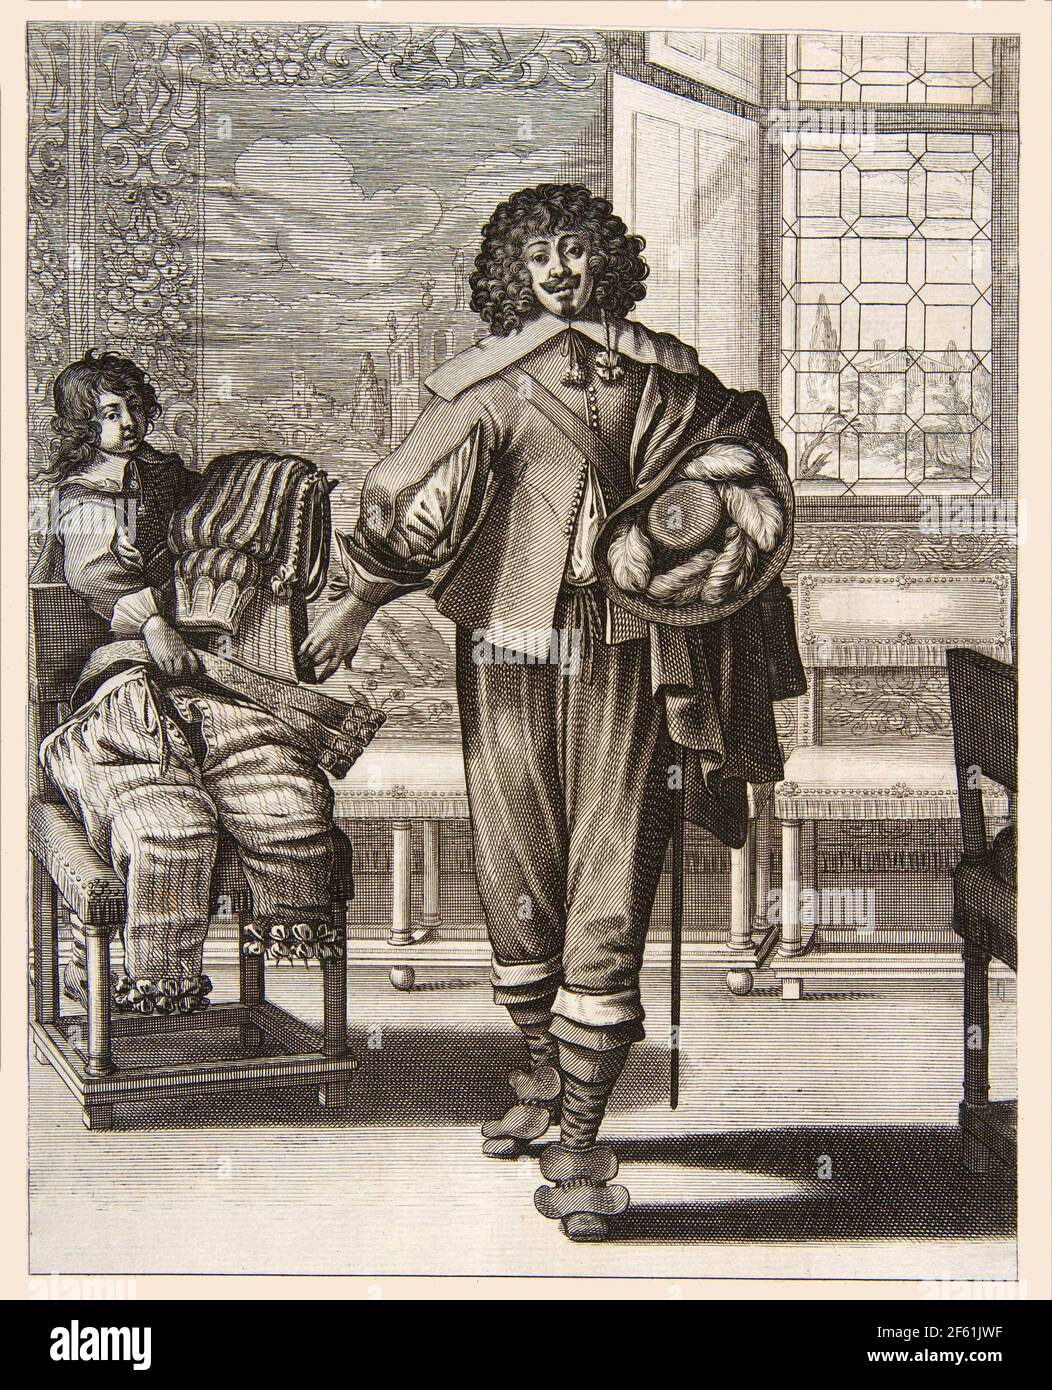 Courtier Following Edict Against Superfluity in Dress, mid-17th C. Stock Photo